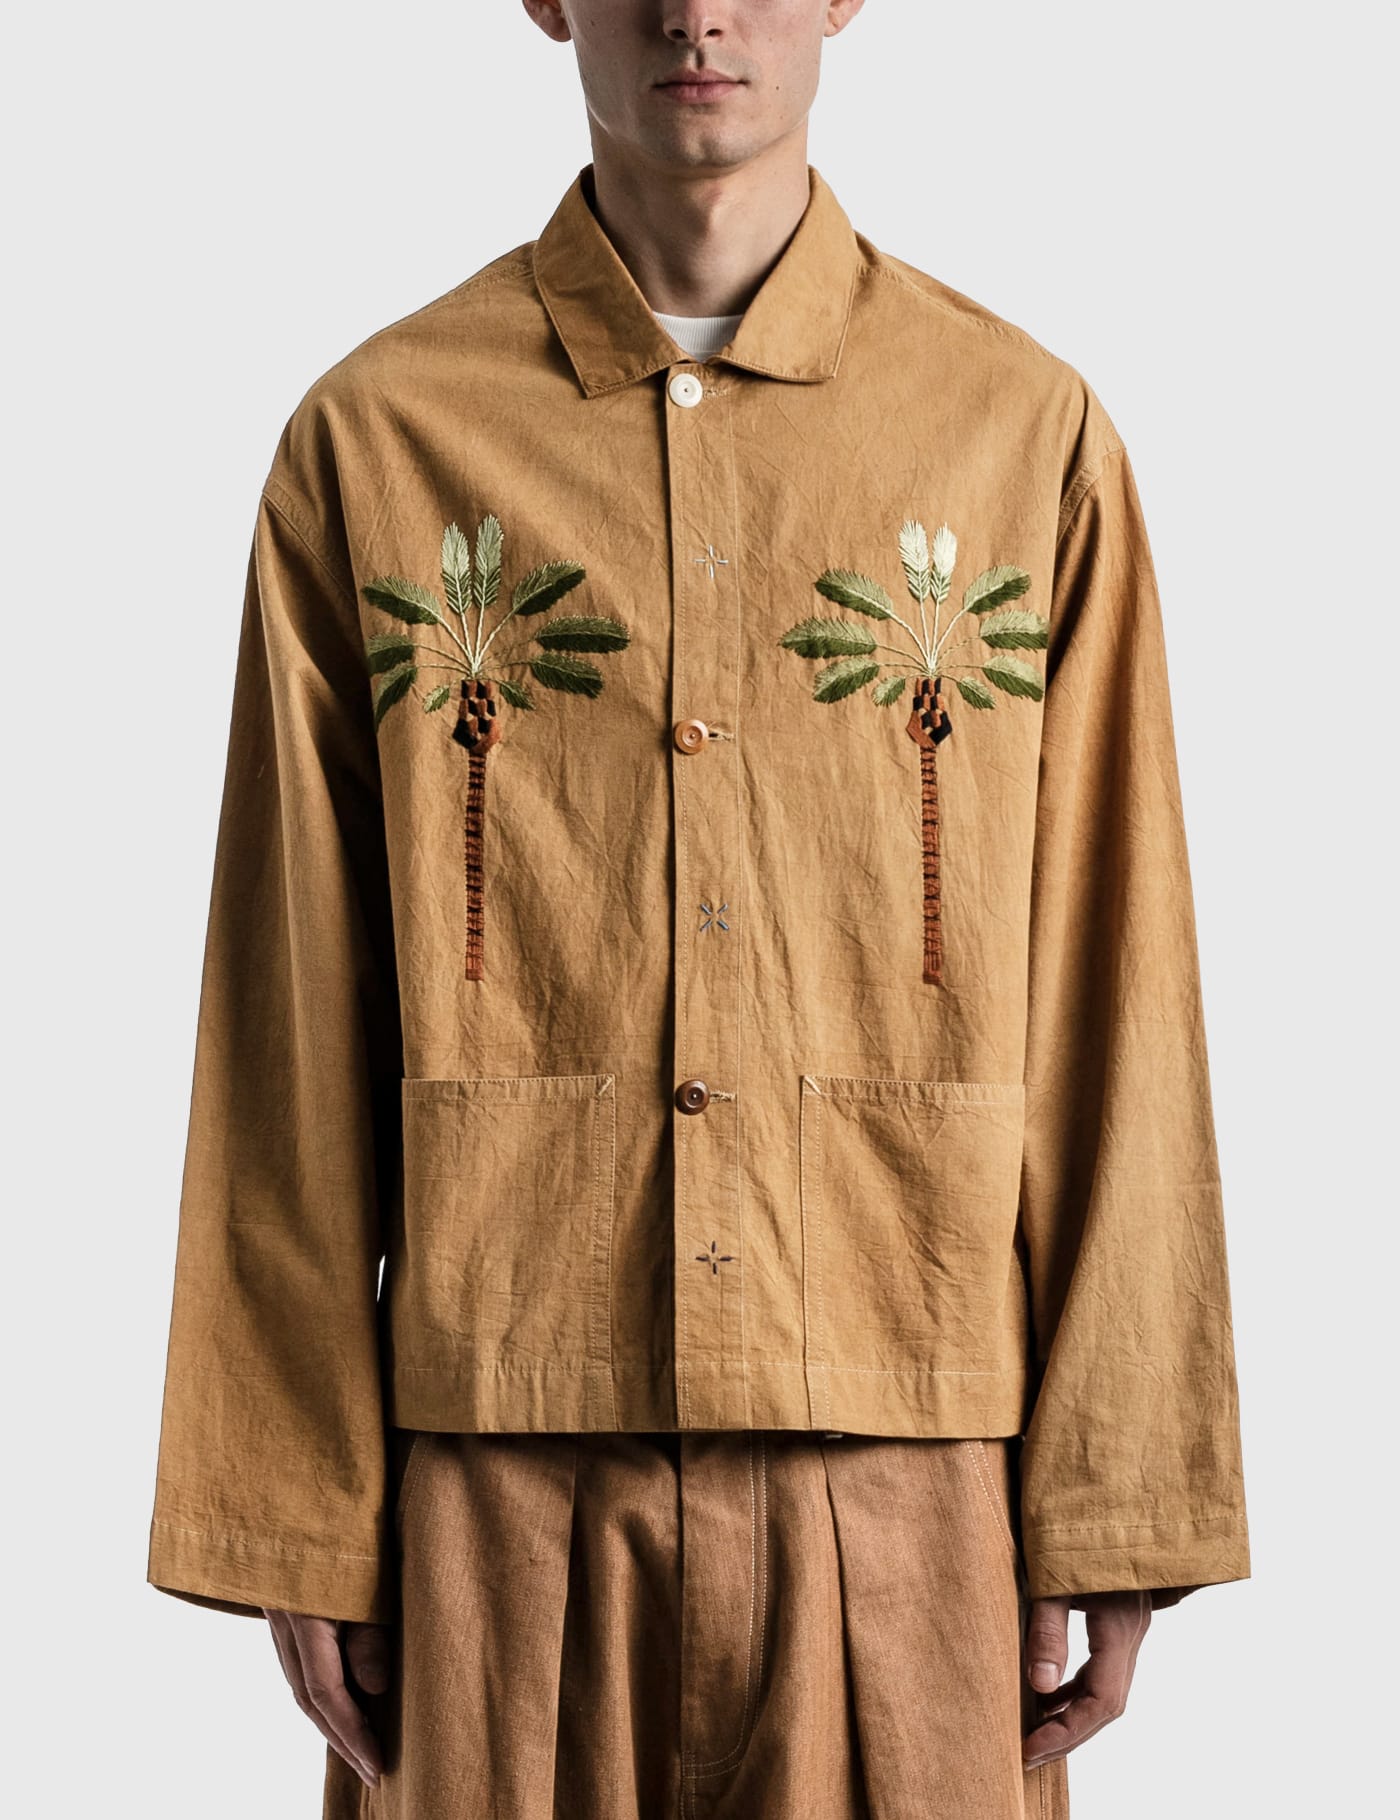 STORY mfg Mens Clothing Jackets Casual jackets Short On Time Embroidered Organic Cotton Chore Jacket in Natural for Men 